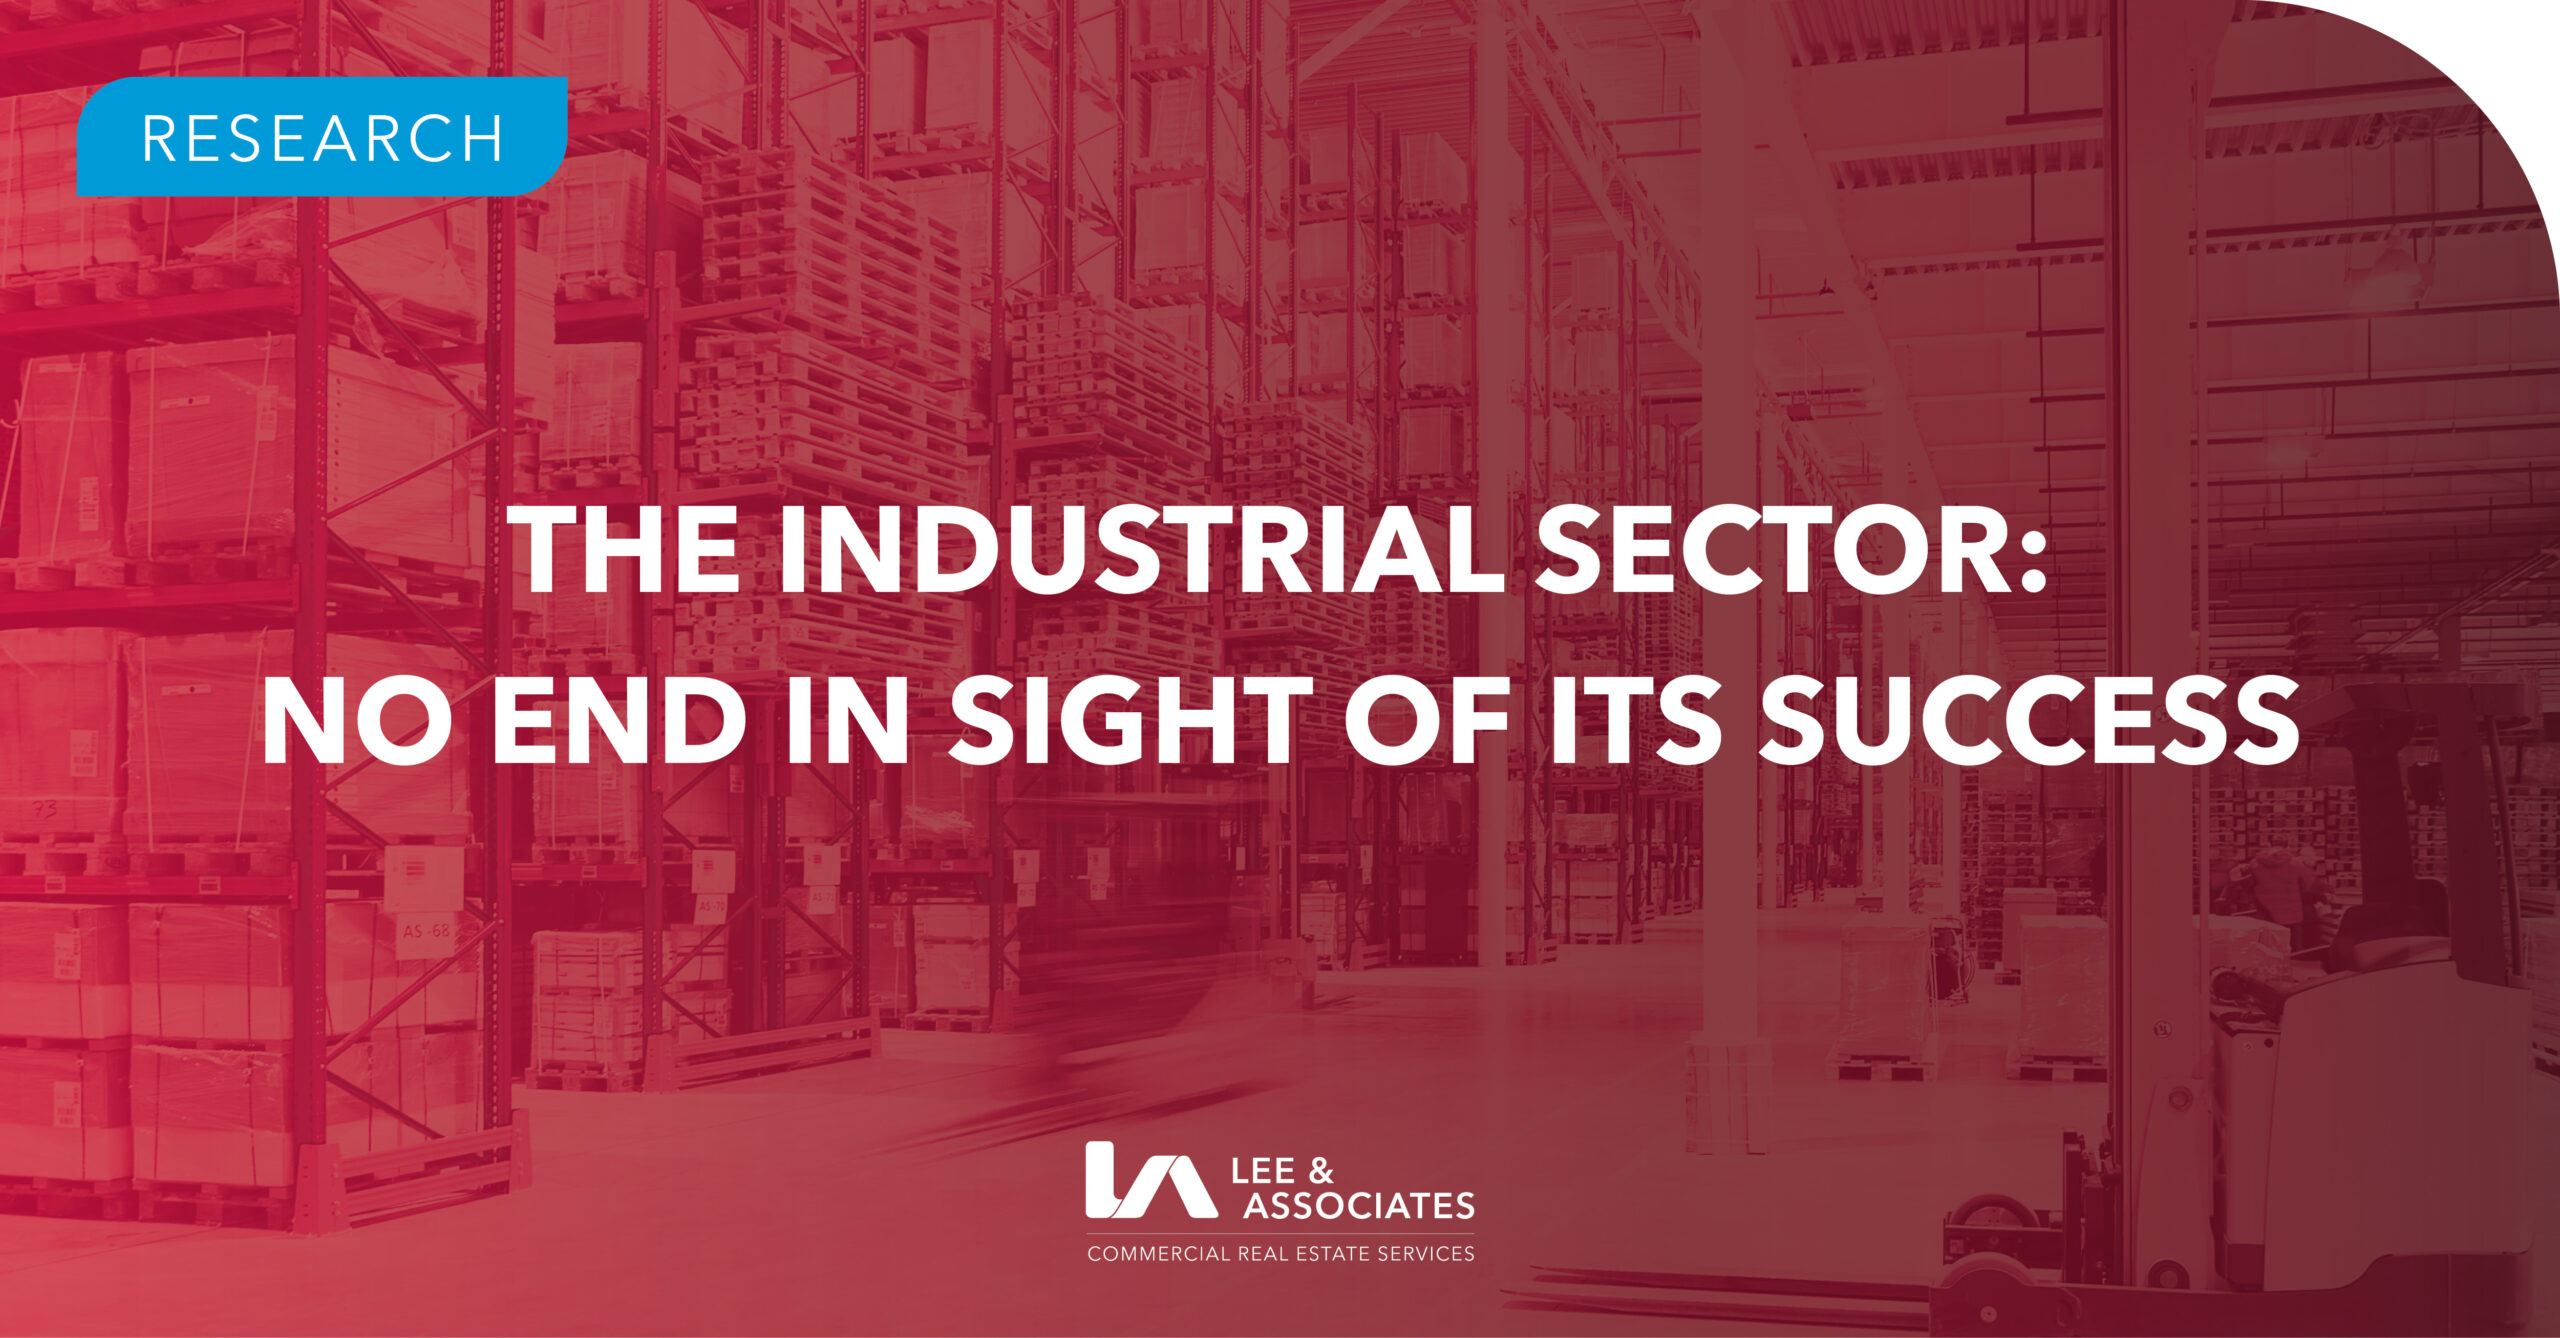 The Industrial Sector: No End in Sight of Its Success